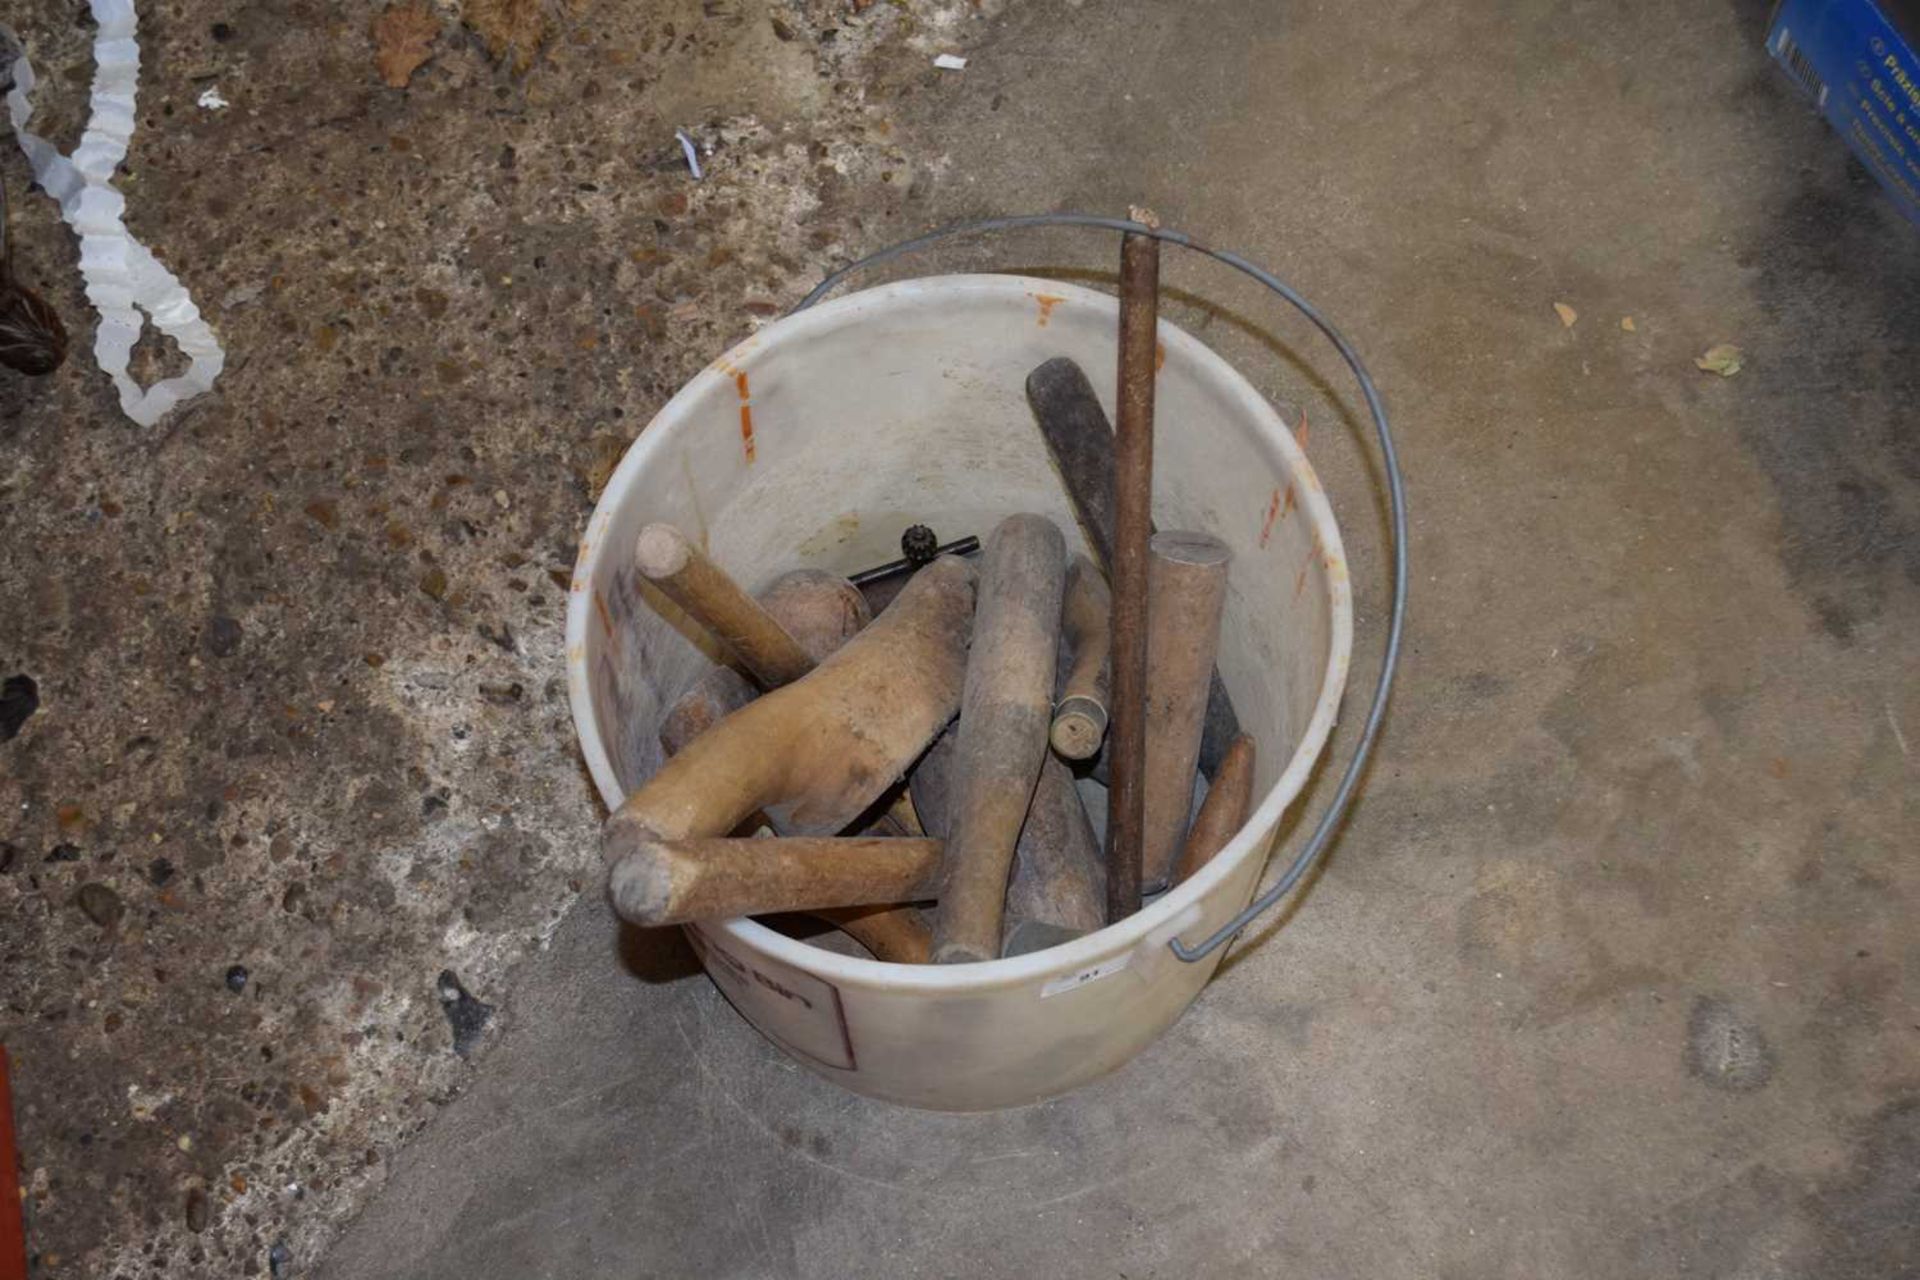 A bucket of lead working tools